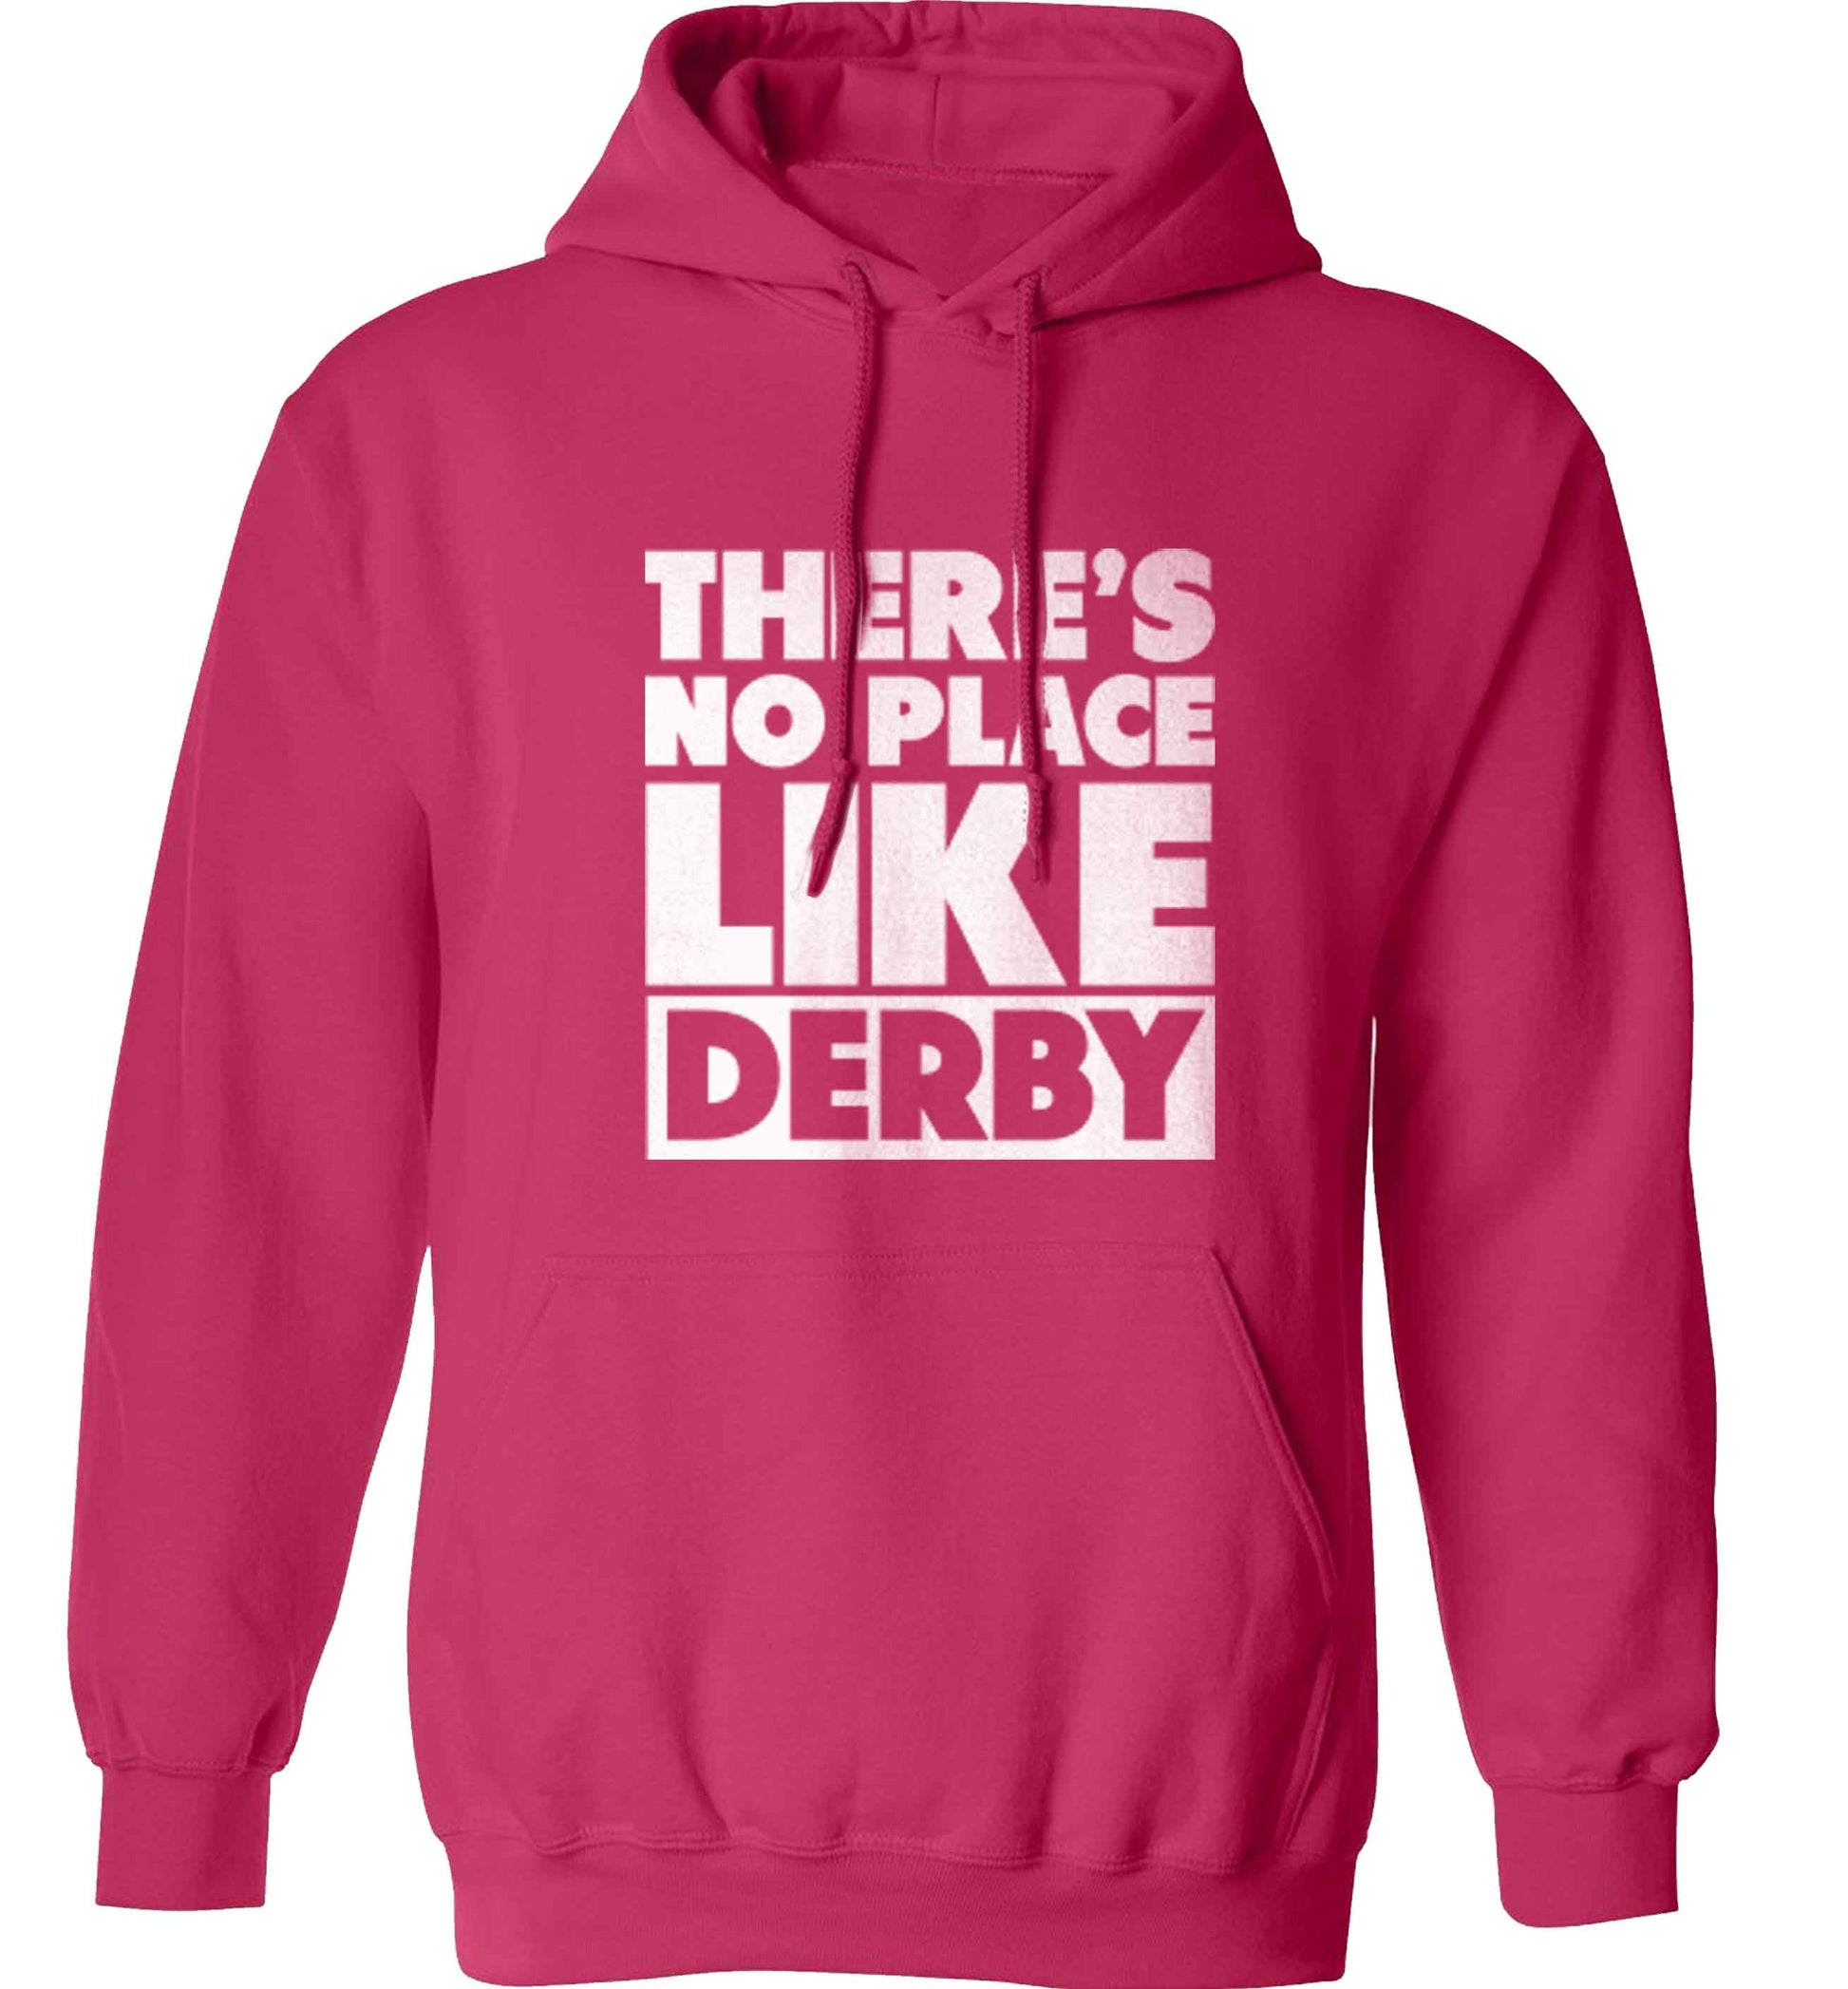 There's no place like Derby adults unisex pink hoodie 2XL